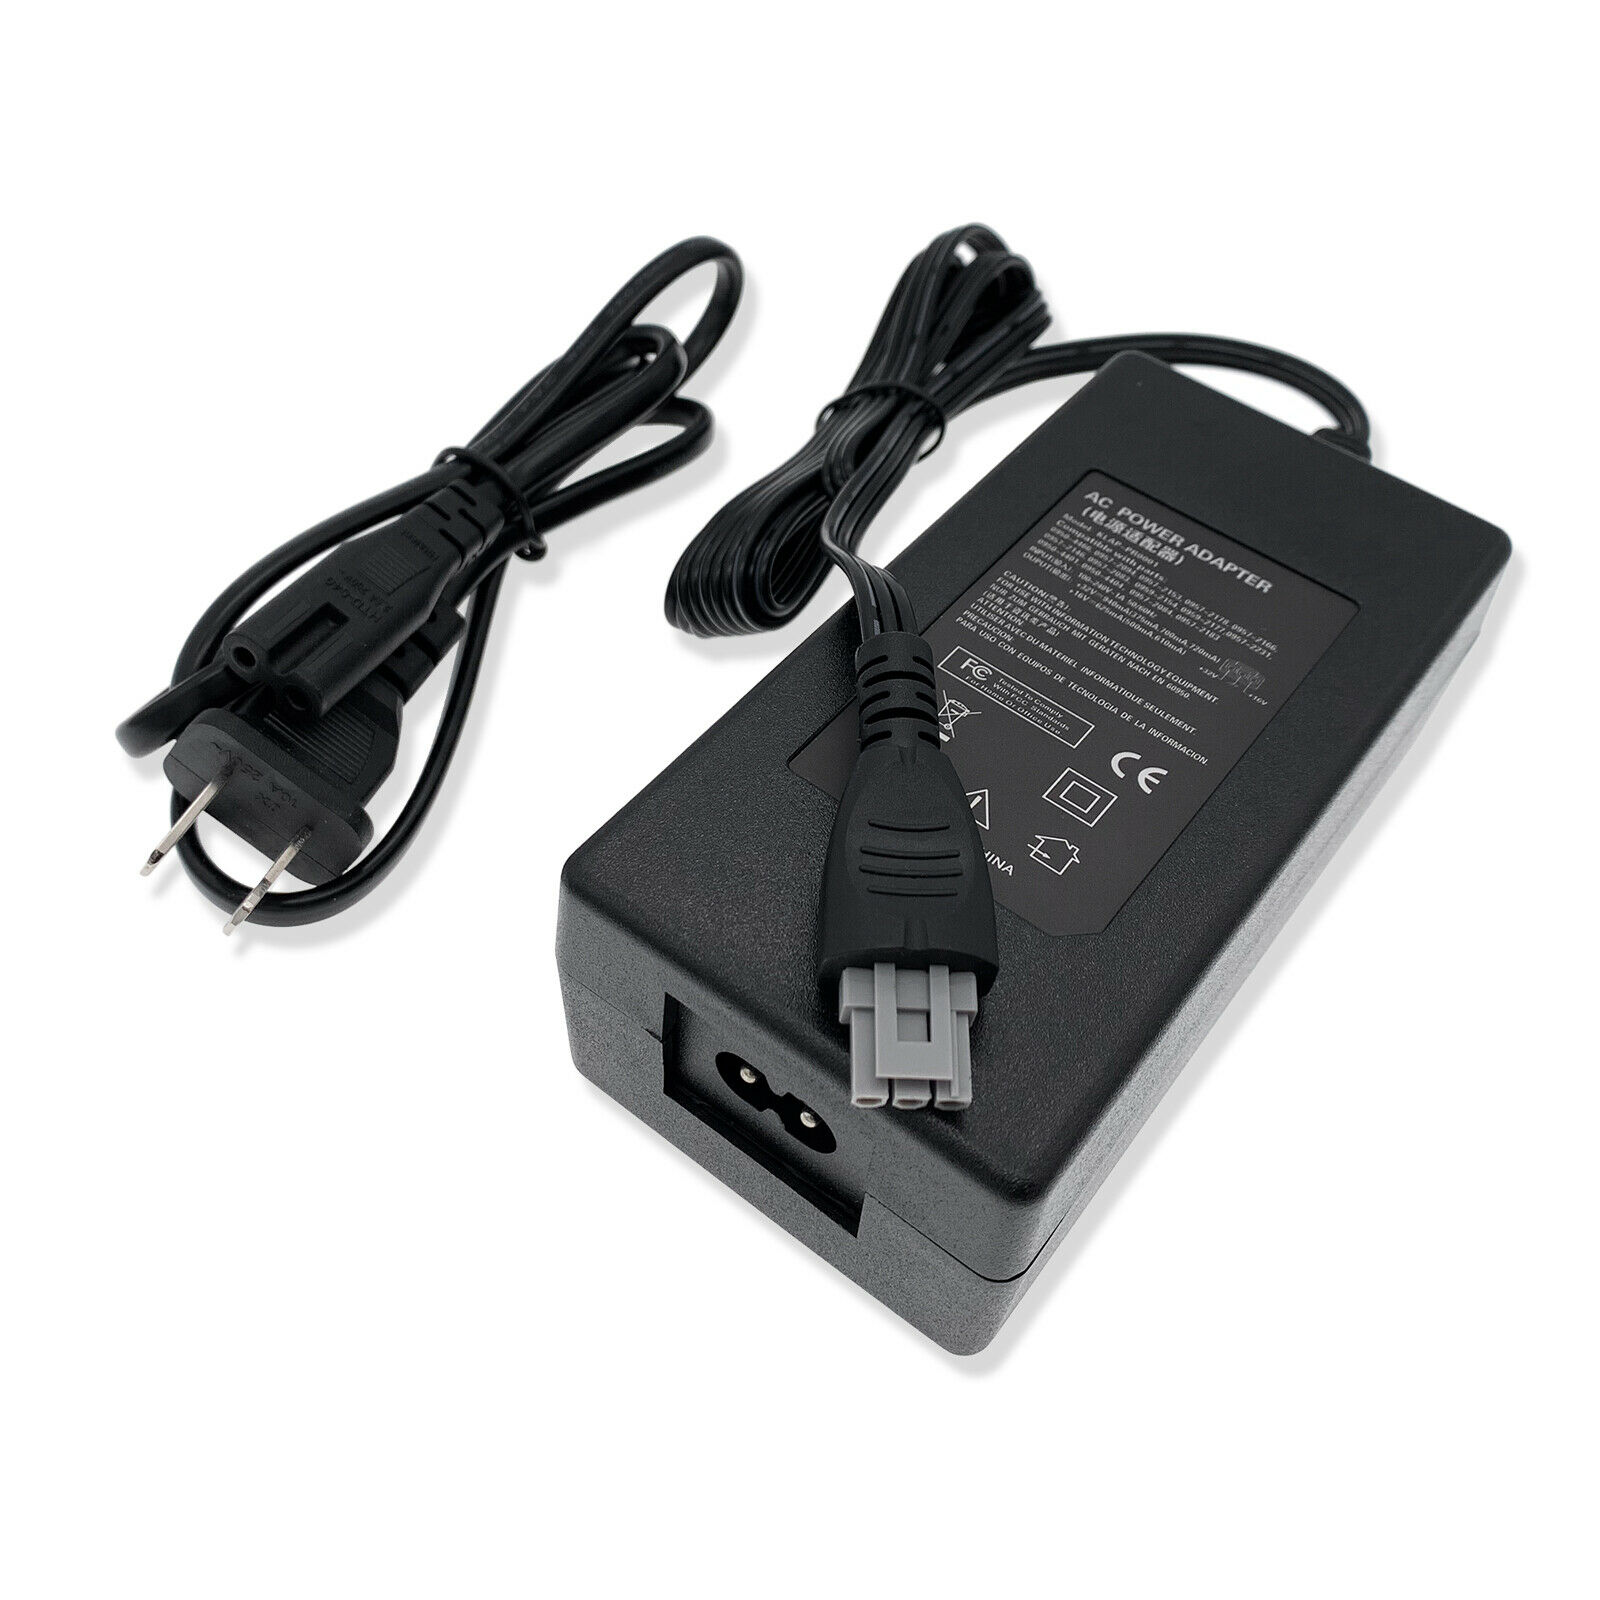 New AC Power Adapter Cord For HP DeskJet F4175 F4180 F4185 F4188 F4190 Printer N - Click Image to Close